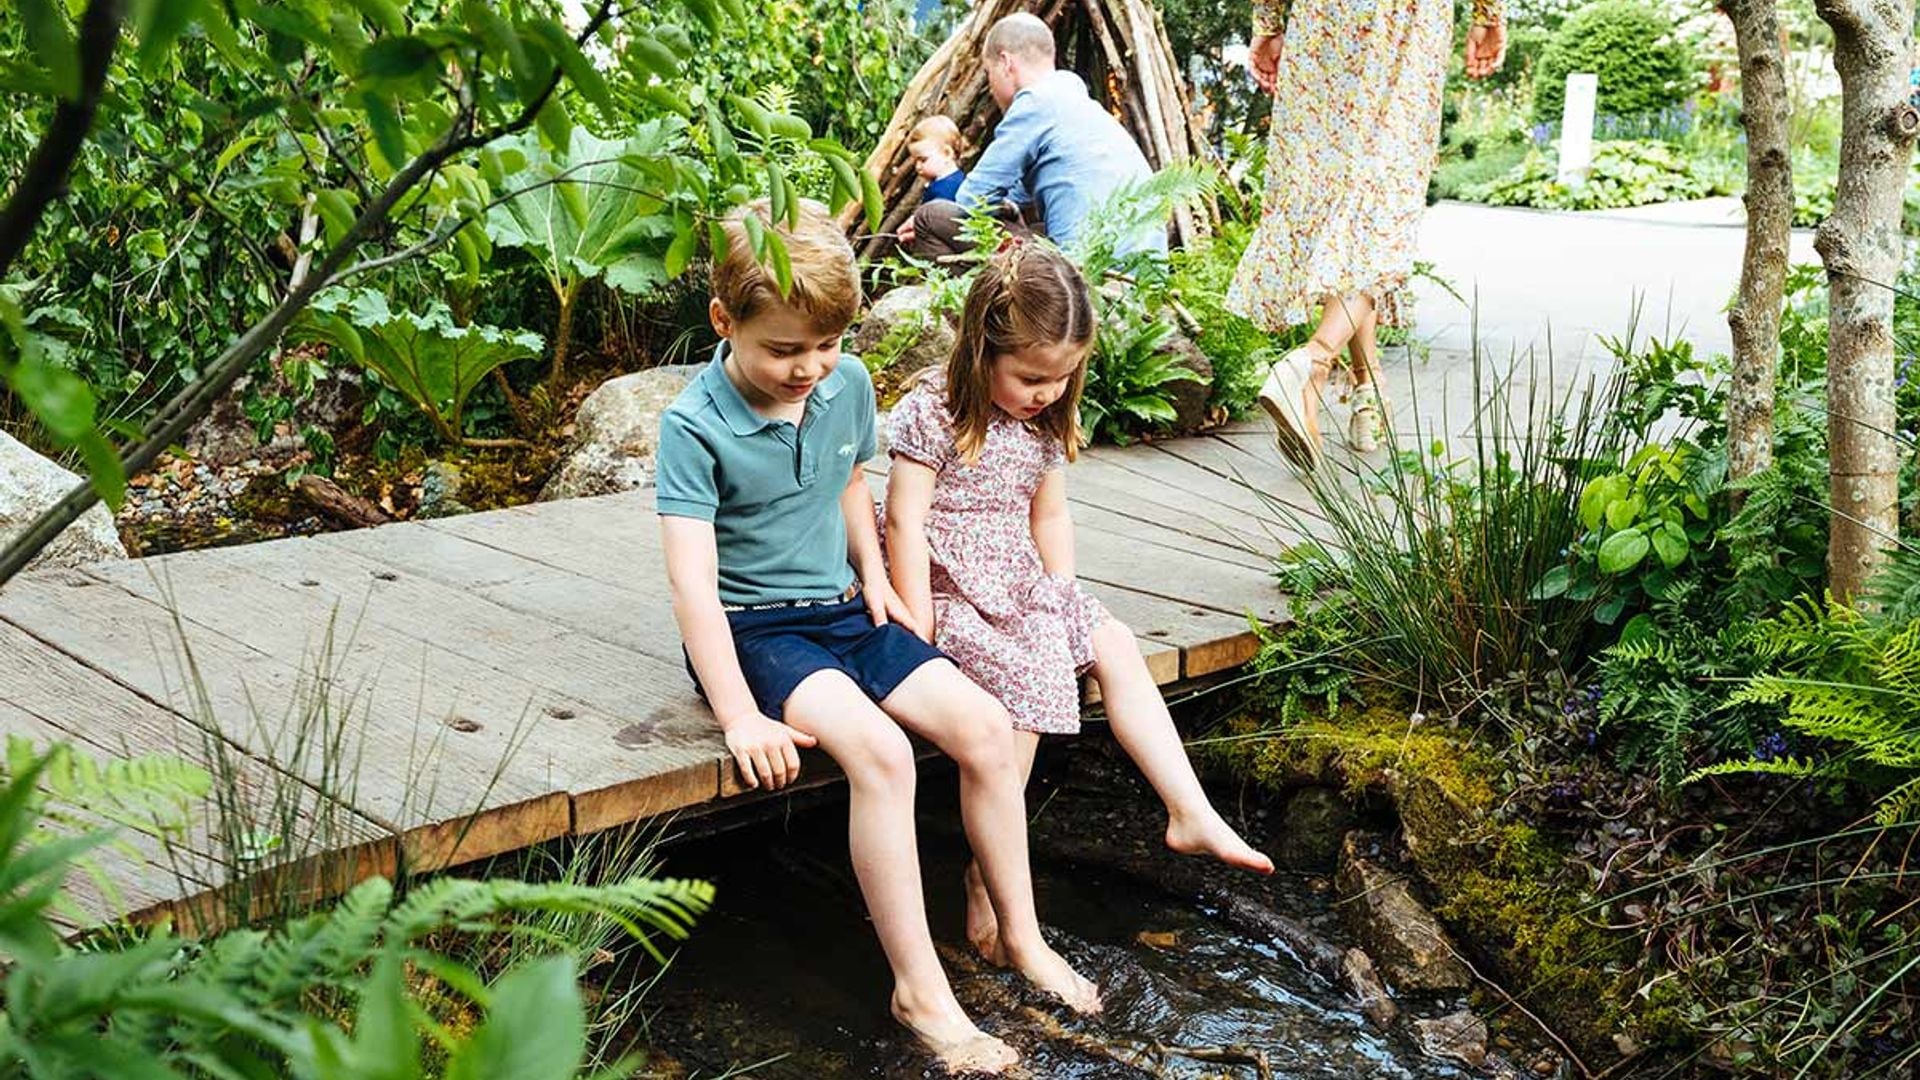 Royal shock: Kate Middleton reveals how her children SURPRISED her at Chelsea Flower Show | HELLO!